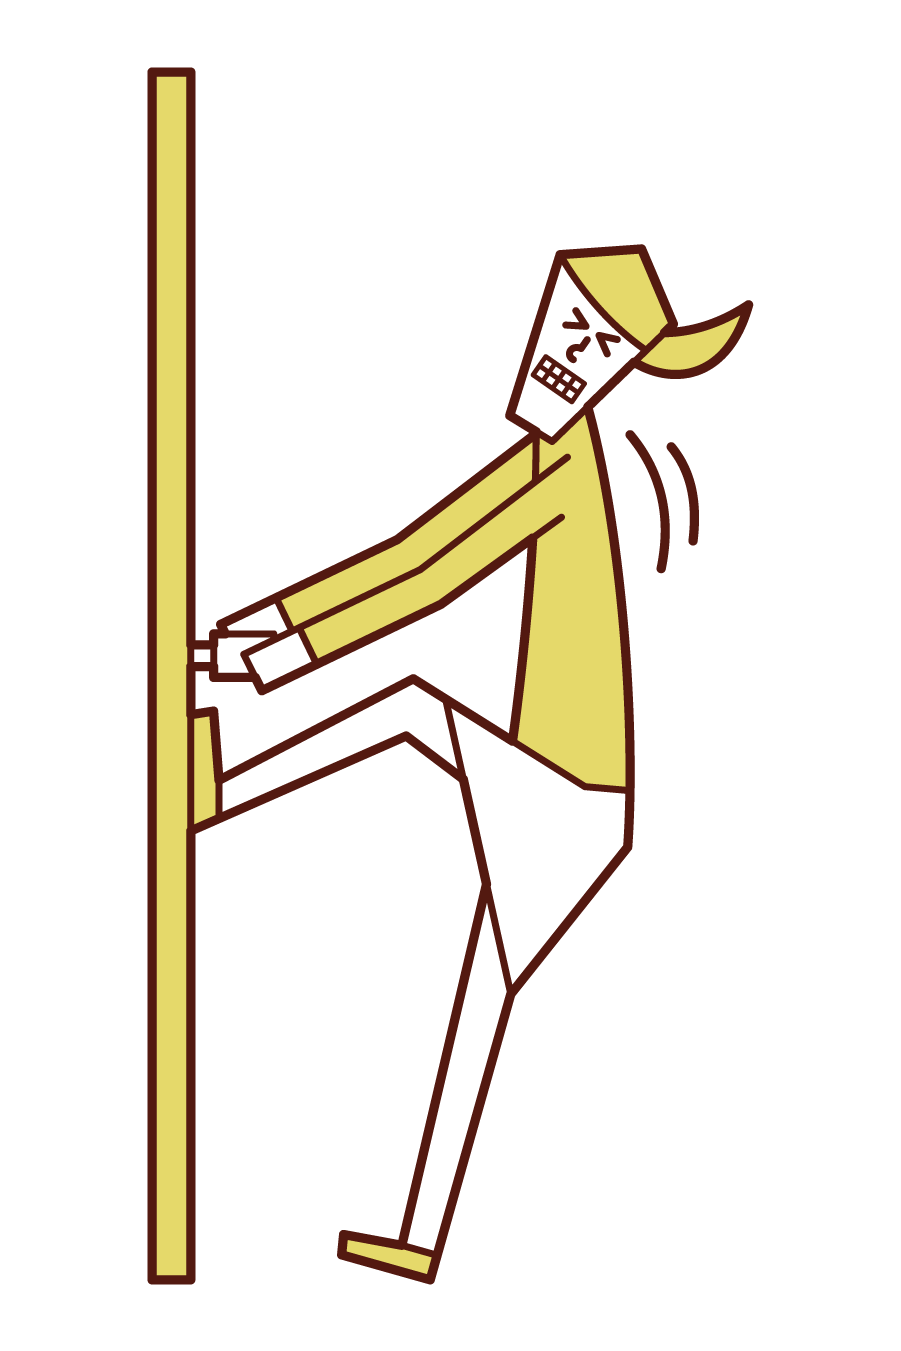 Illustration of a woman trying to open a door that doesn't open